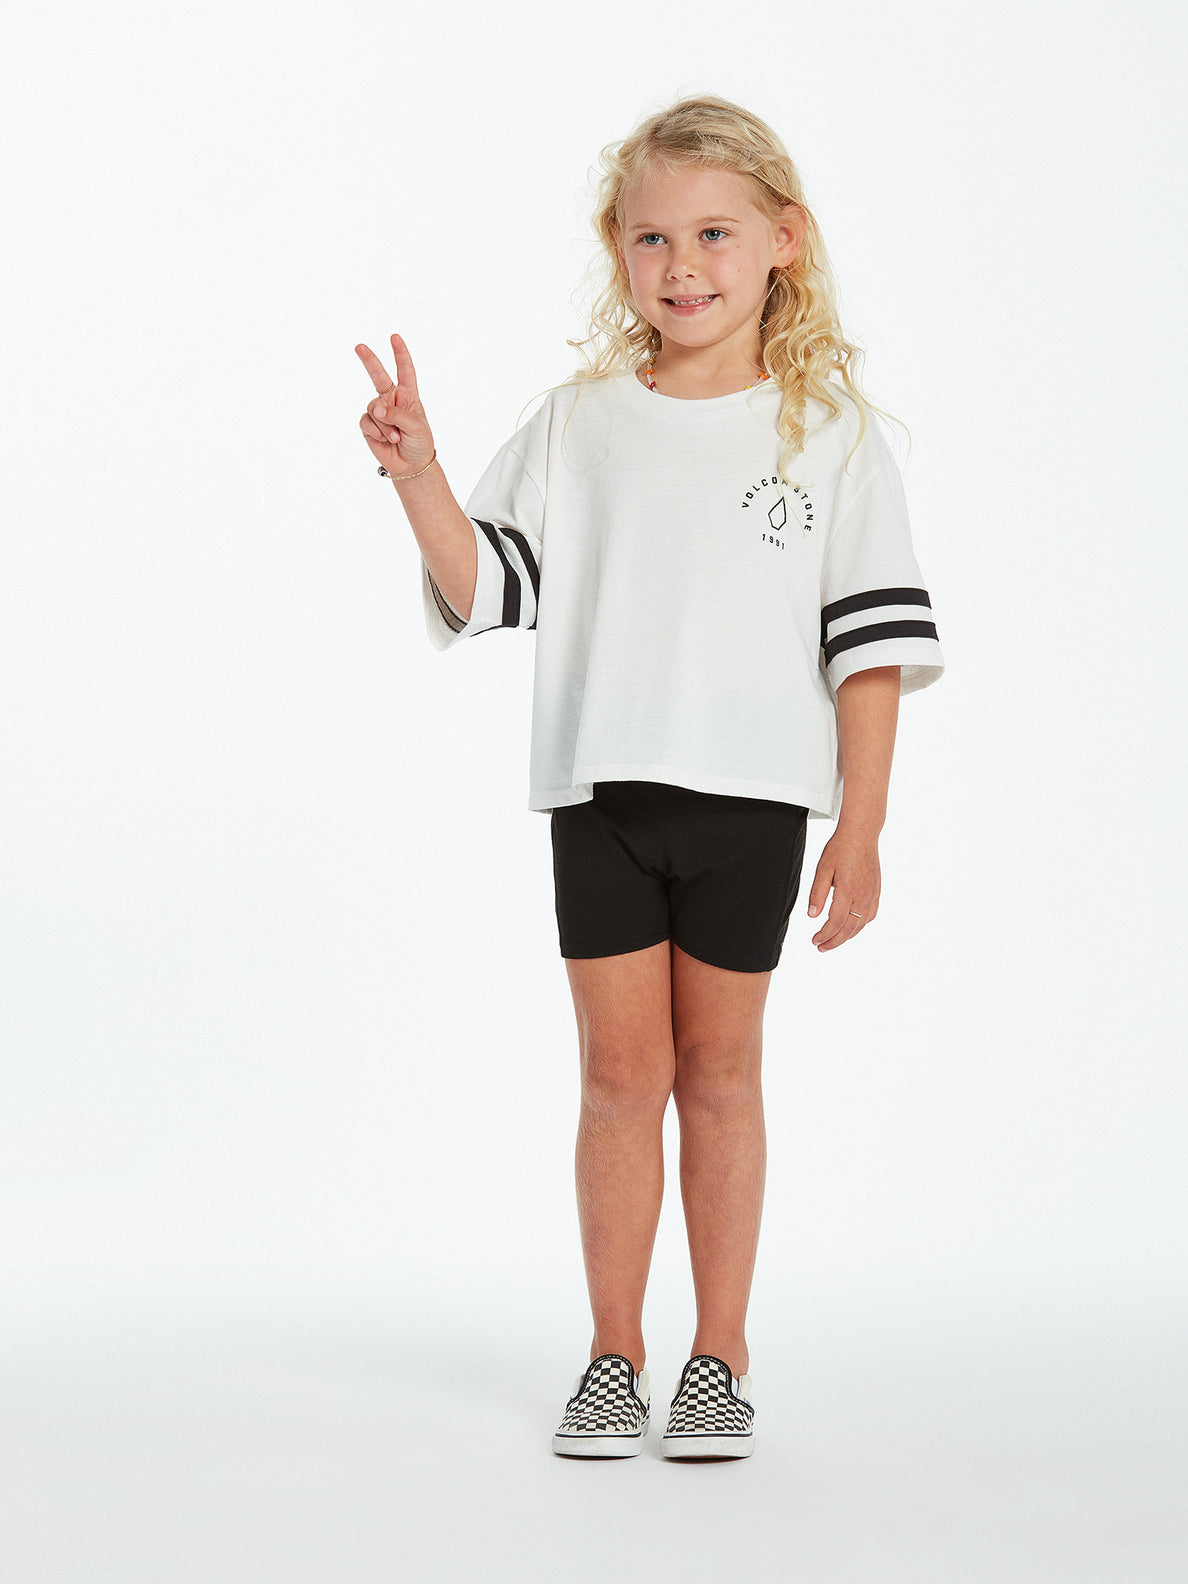 Girls Truly Stoked Short Sleeve Tee - Star White (R3512201_SWH) [6]